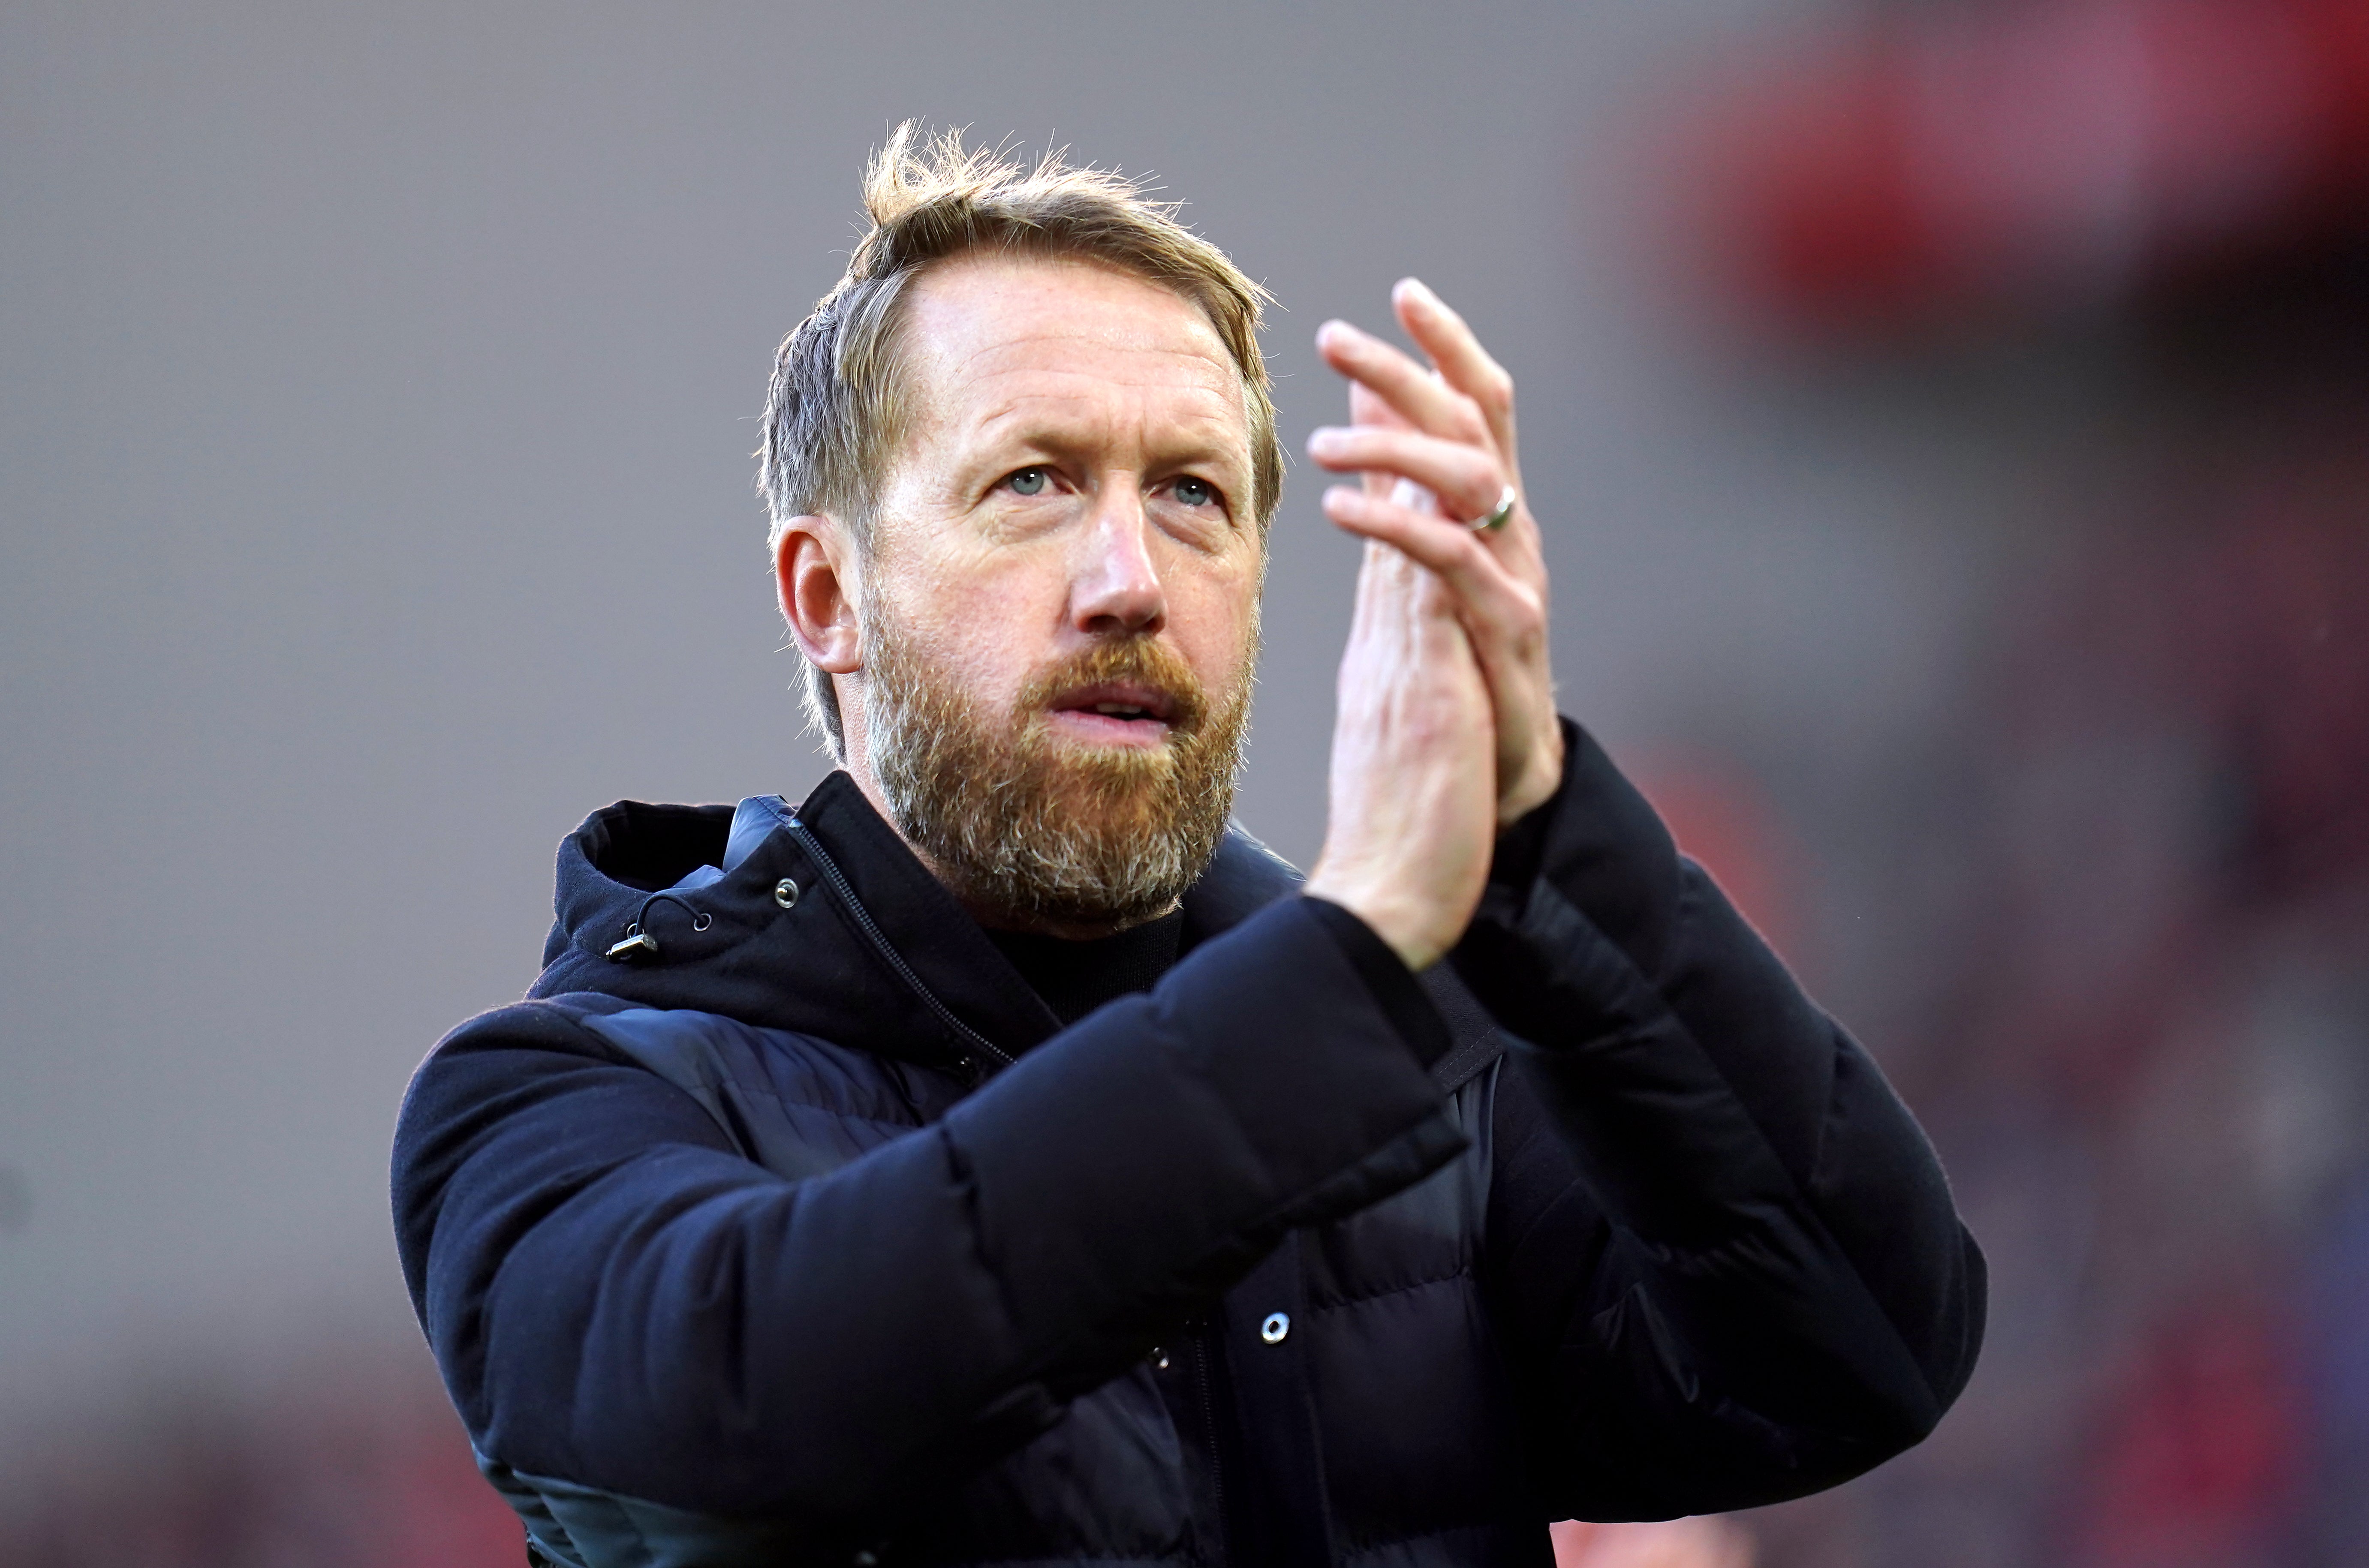 Graham Potter has grown his reputation since taking over at Brighton in 2019